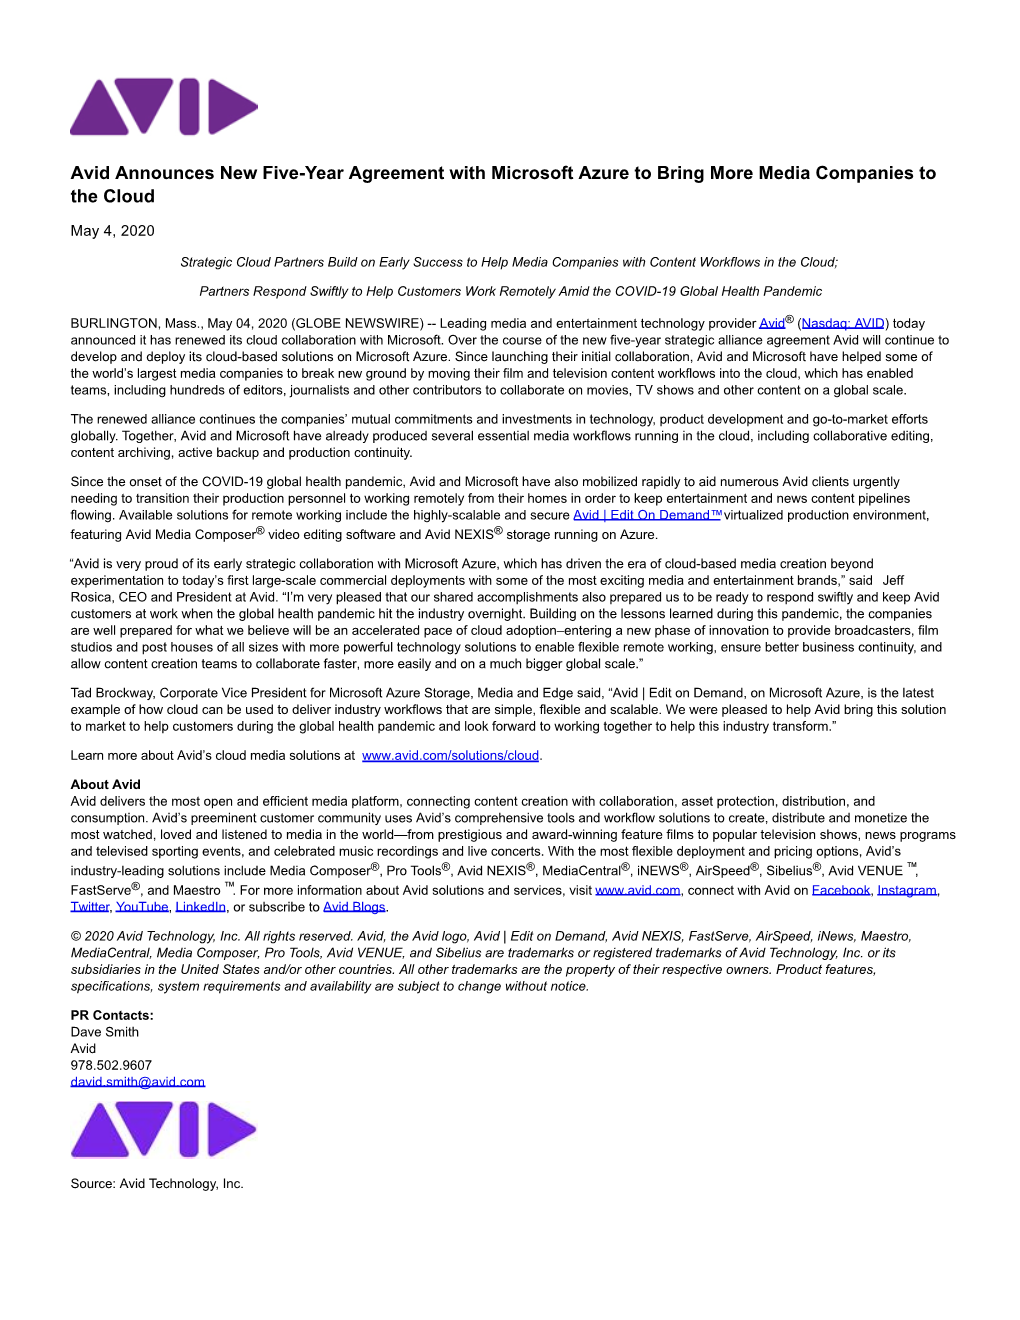 Avid Announces New Five-Year Agreement with Microsoft Azure to Bring More Media Companies to the Cloud